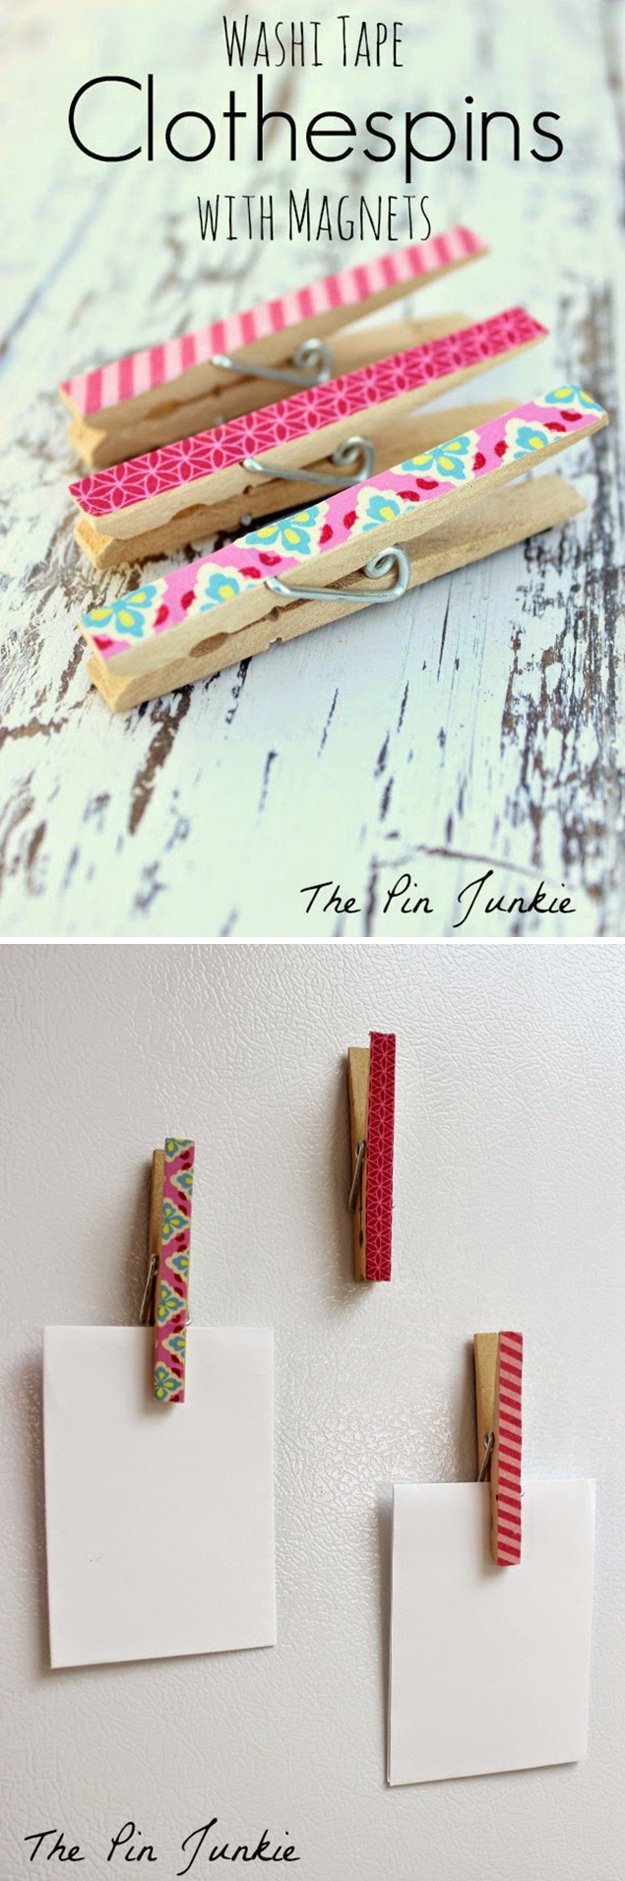 Washi Tape Crafts - Washi Tape Clothespins with Magnets - Wall Art, Frames, Cards, Pencils, Room Decor and DIY Gifts, Back To School Supplies - Creative, Fun Craft Ideas for Teens, Tweens and Teenagers - Step by Step Tutorials and Instructions #washitape #crafts #cheapcrafts #teencrafts